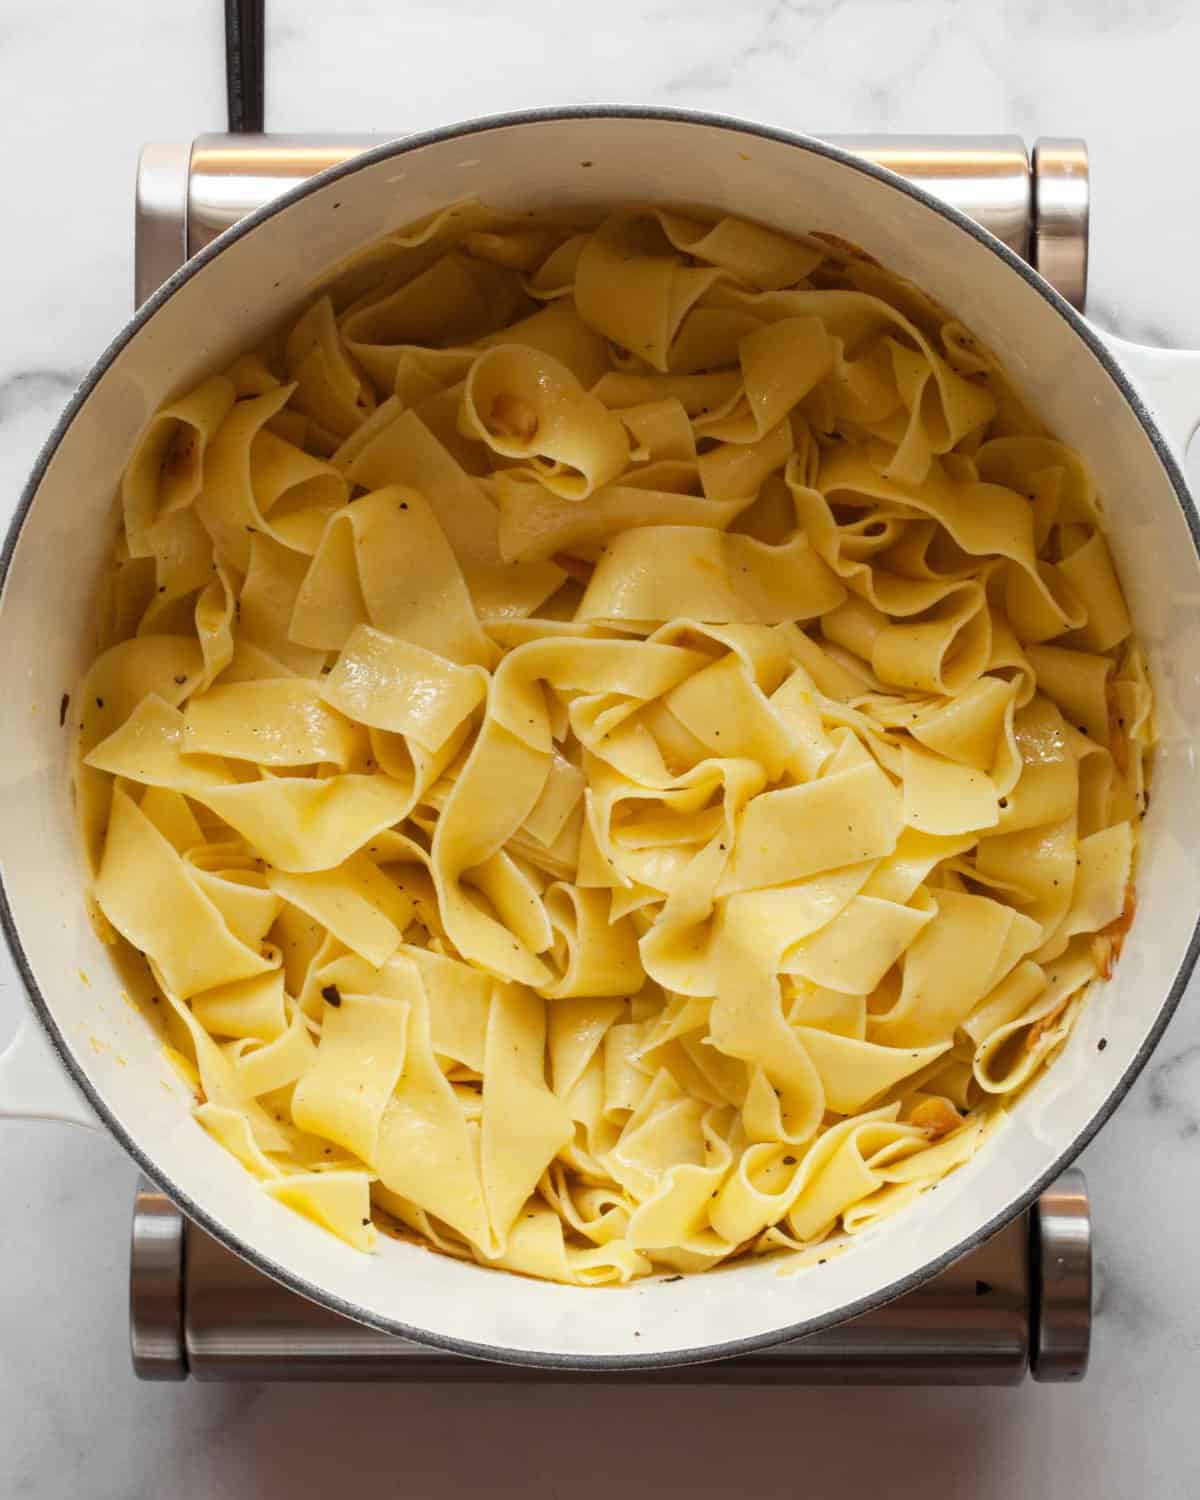 https://www.lastingredient.com/wp-content/uploads/2017/08/how-to-make-herb-pappardelle6.jpg